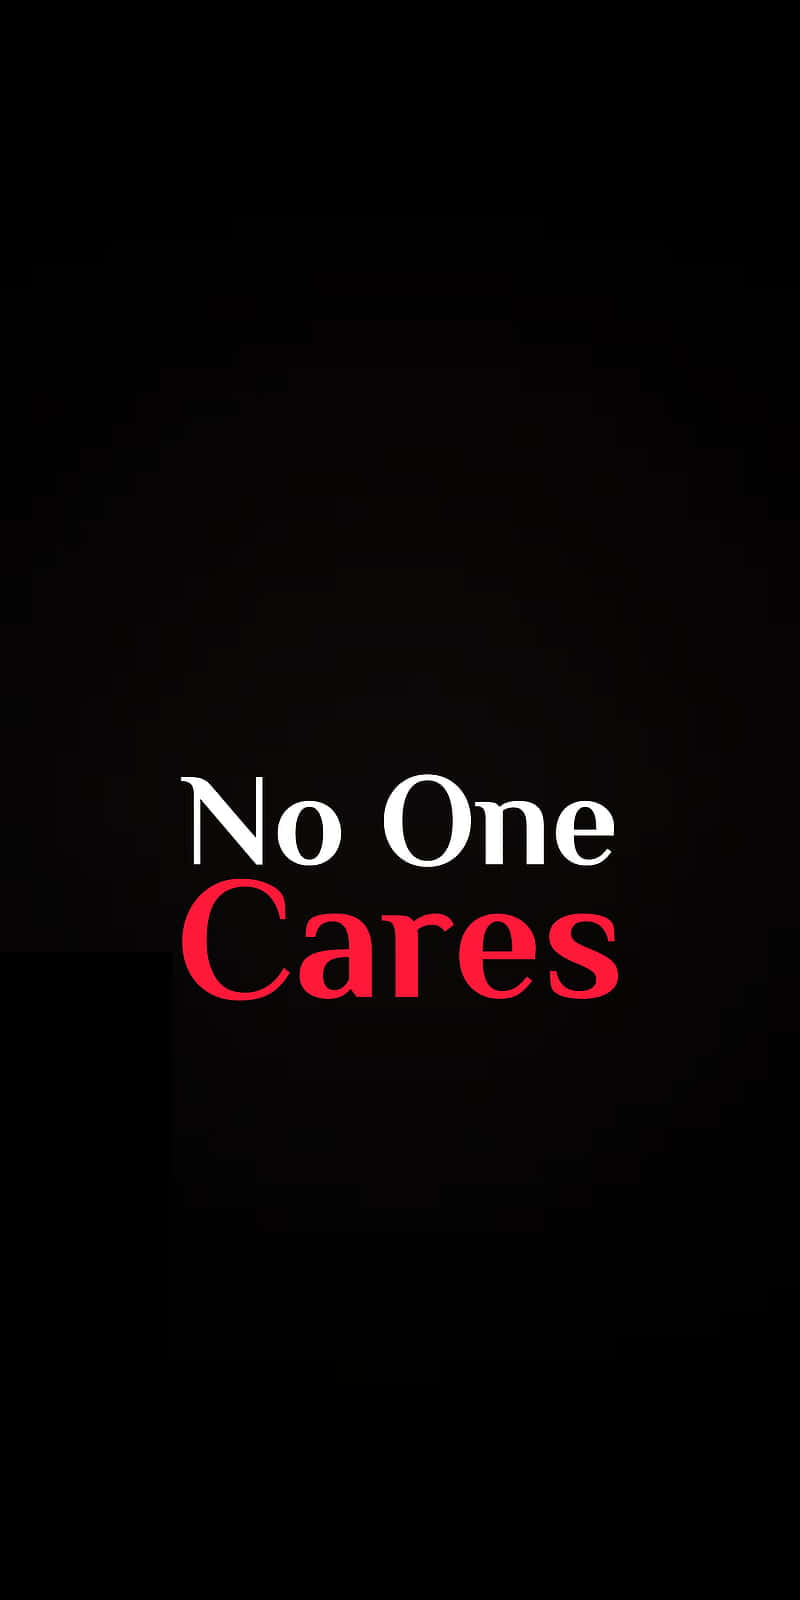 No One Cares - A Black Background With Red Text Wallpaper